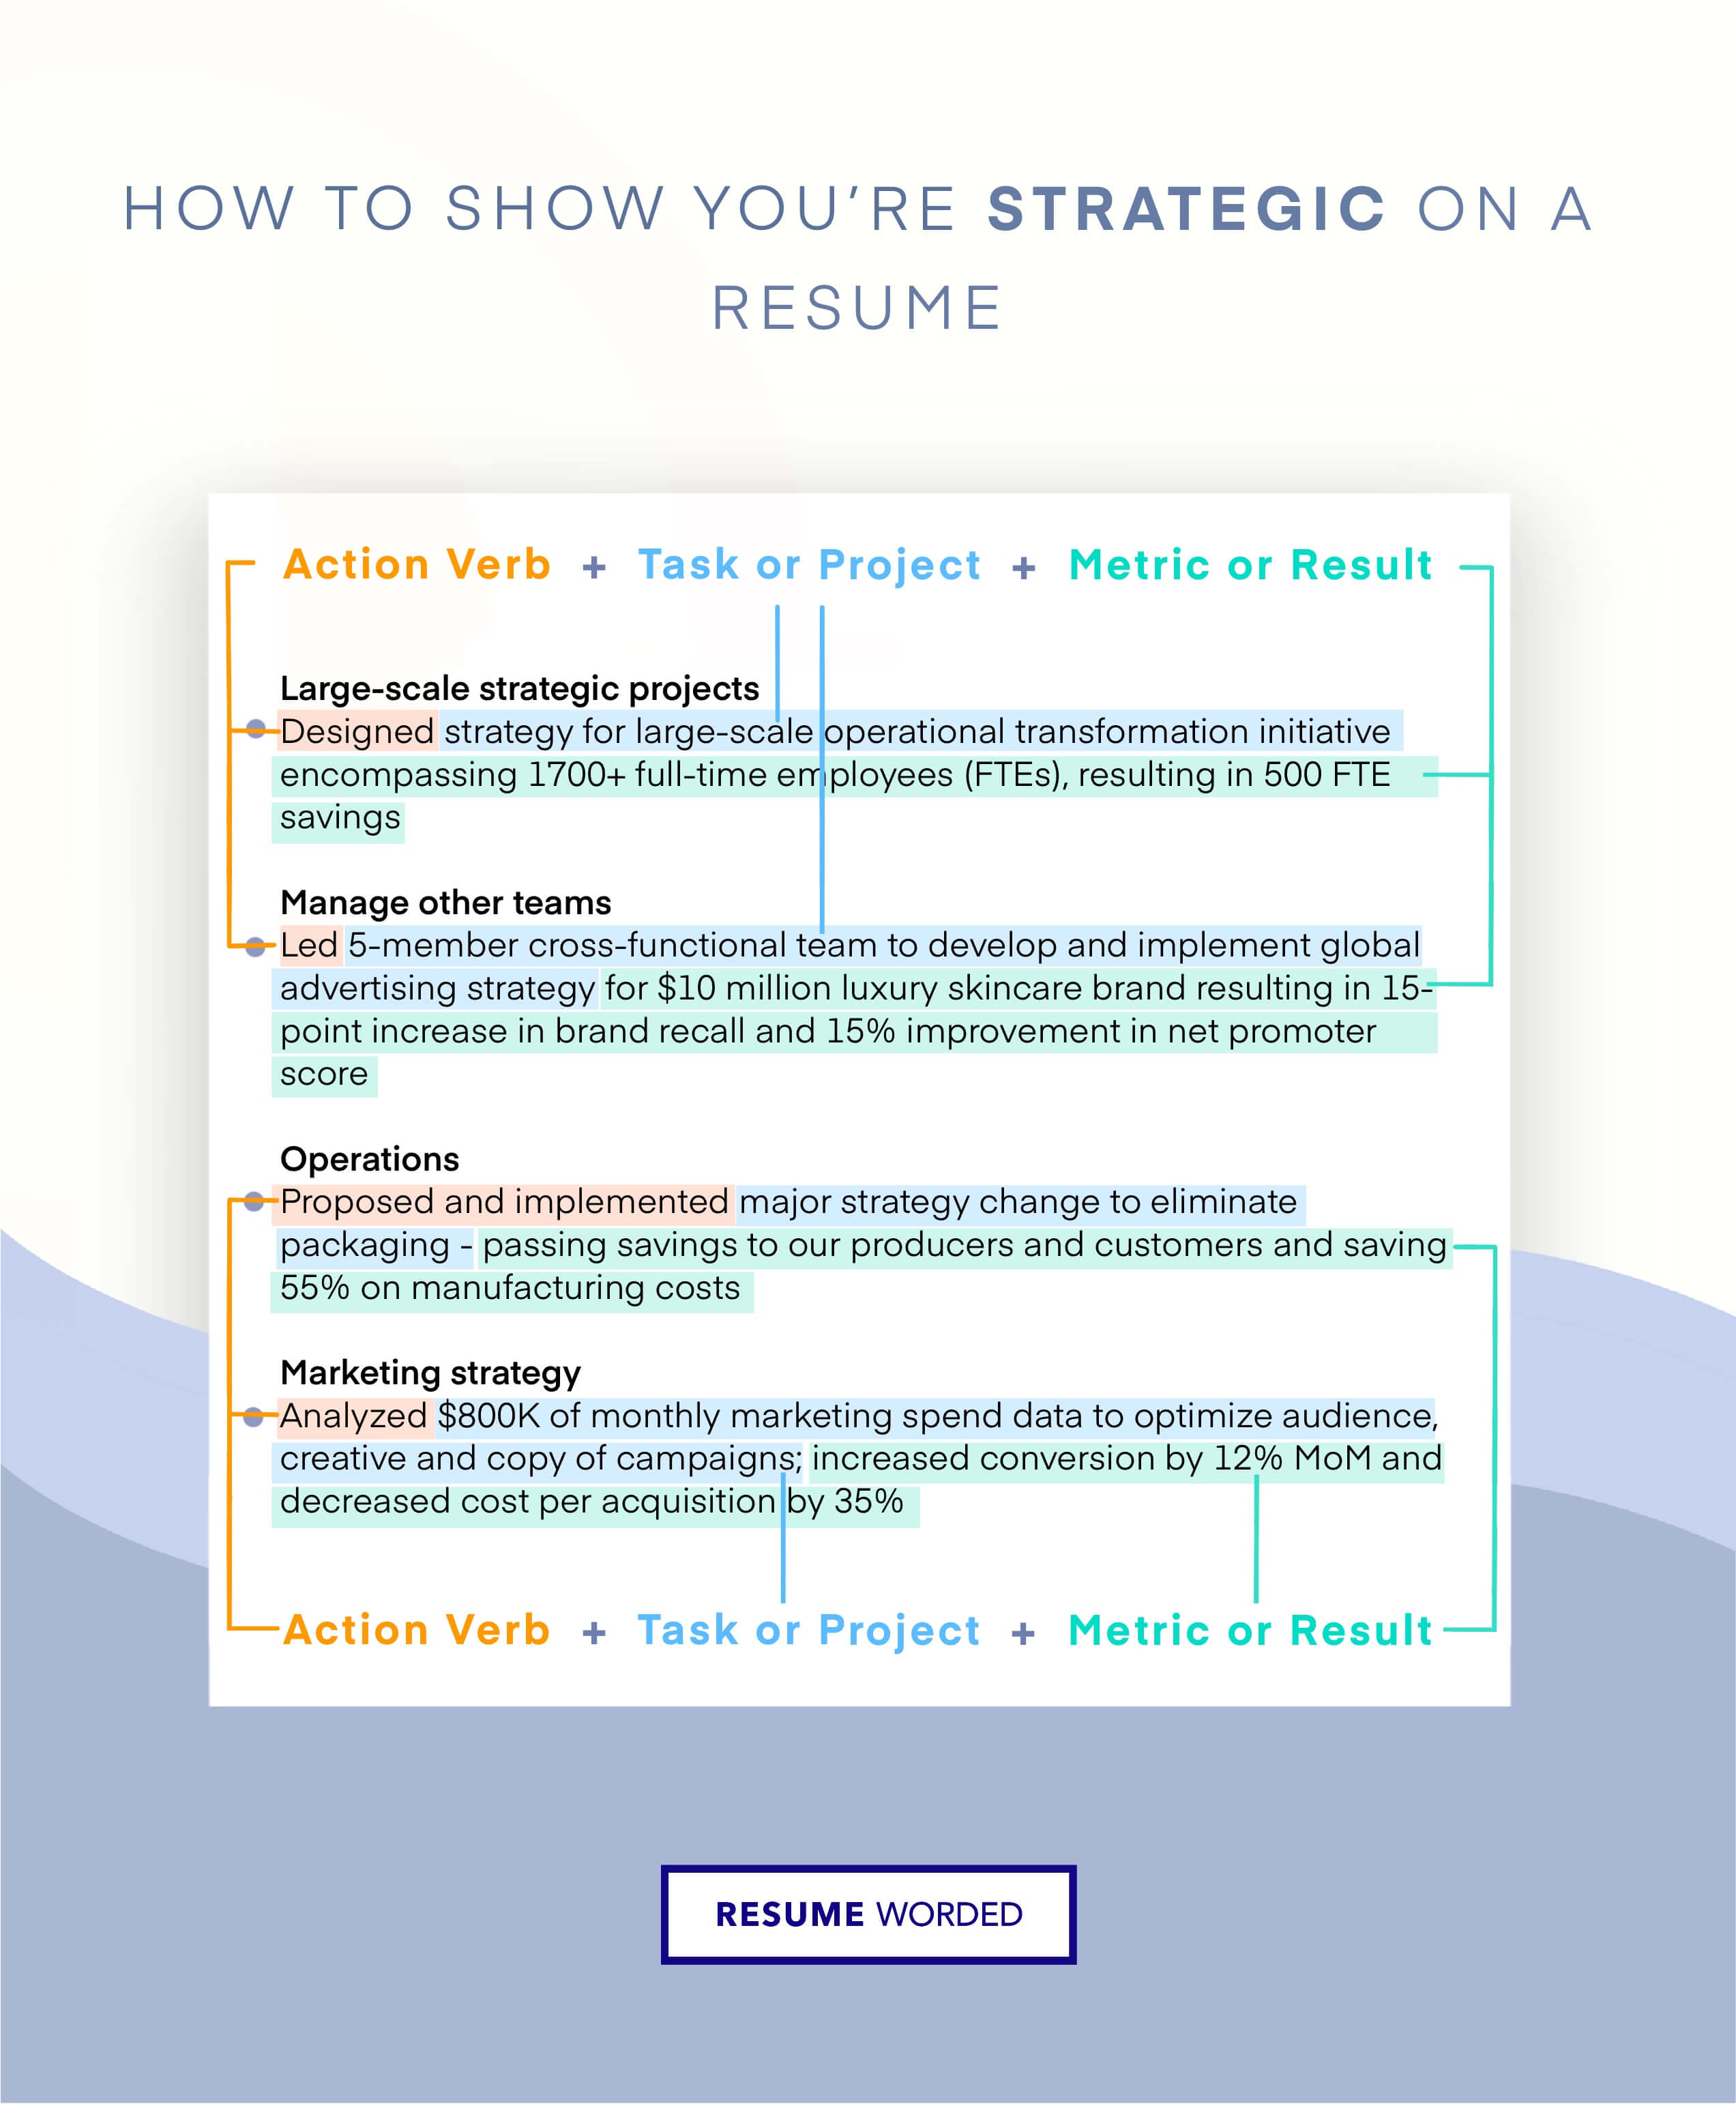 Demonstrate strategic thinking and decision-making skills - Financial Analyst CV